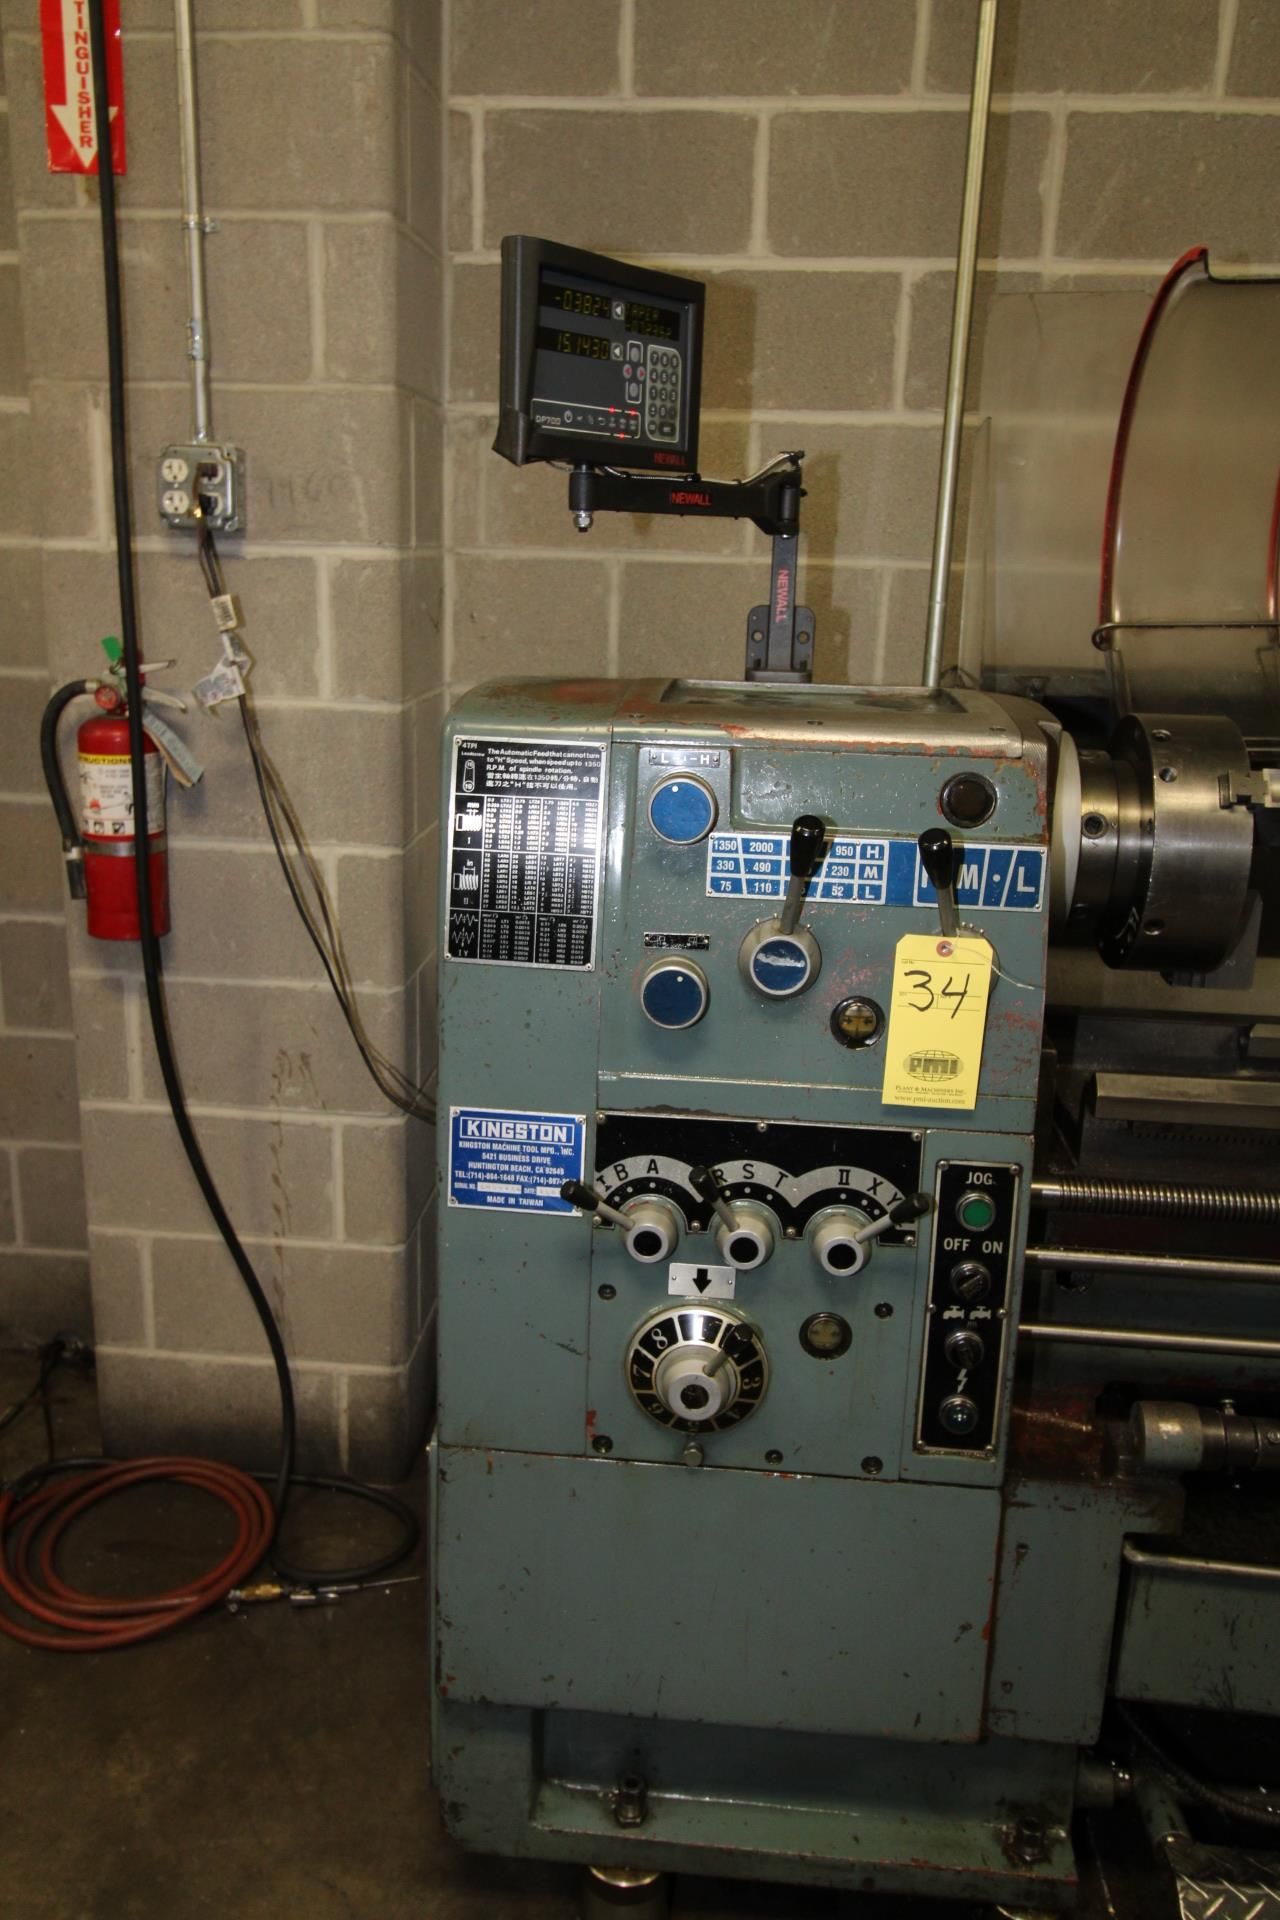 GAP BED ENGINE LATHE, KINGSTON 17” X 60”, new 2003, spds: 52-1350 RPM, 10” dia. 3-jaw chuck, 4-jaw - Image 11 of 15